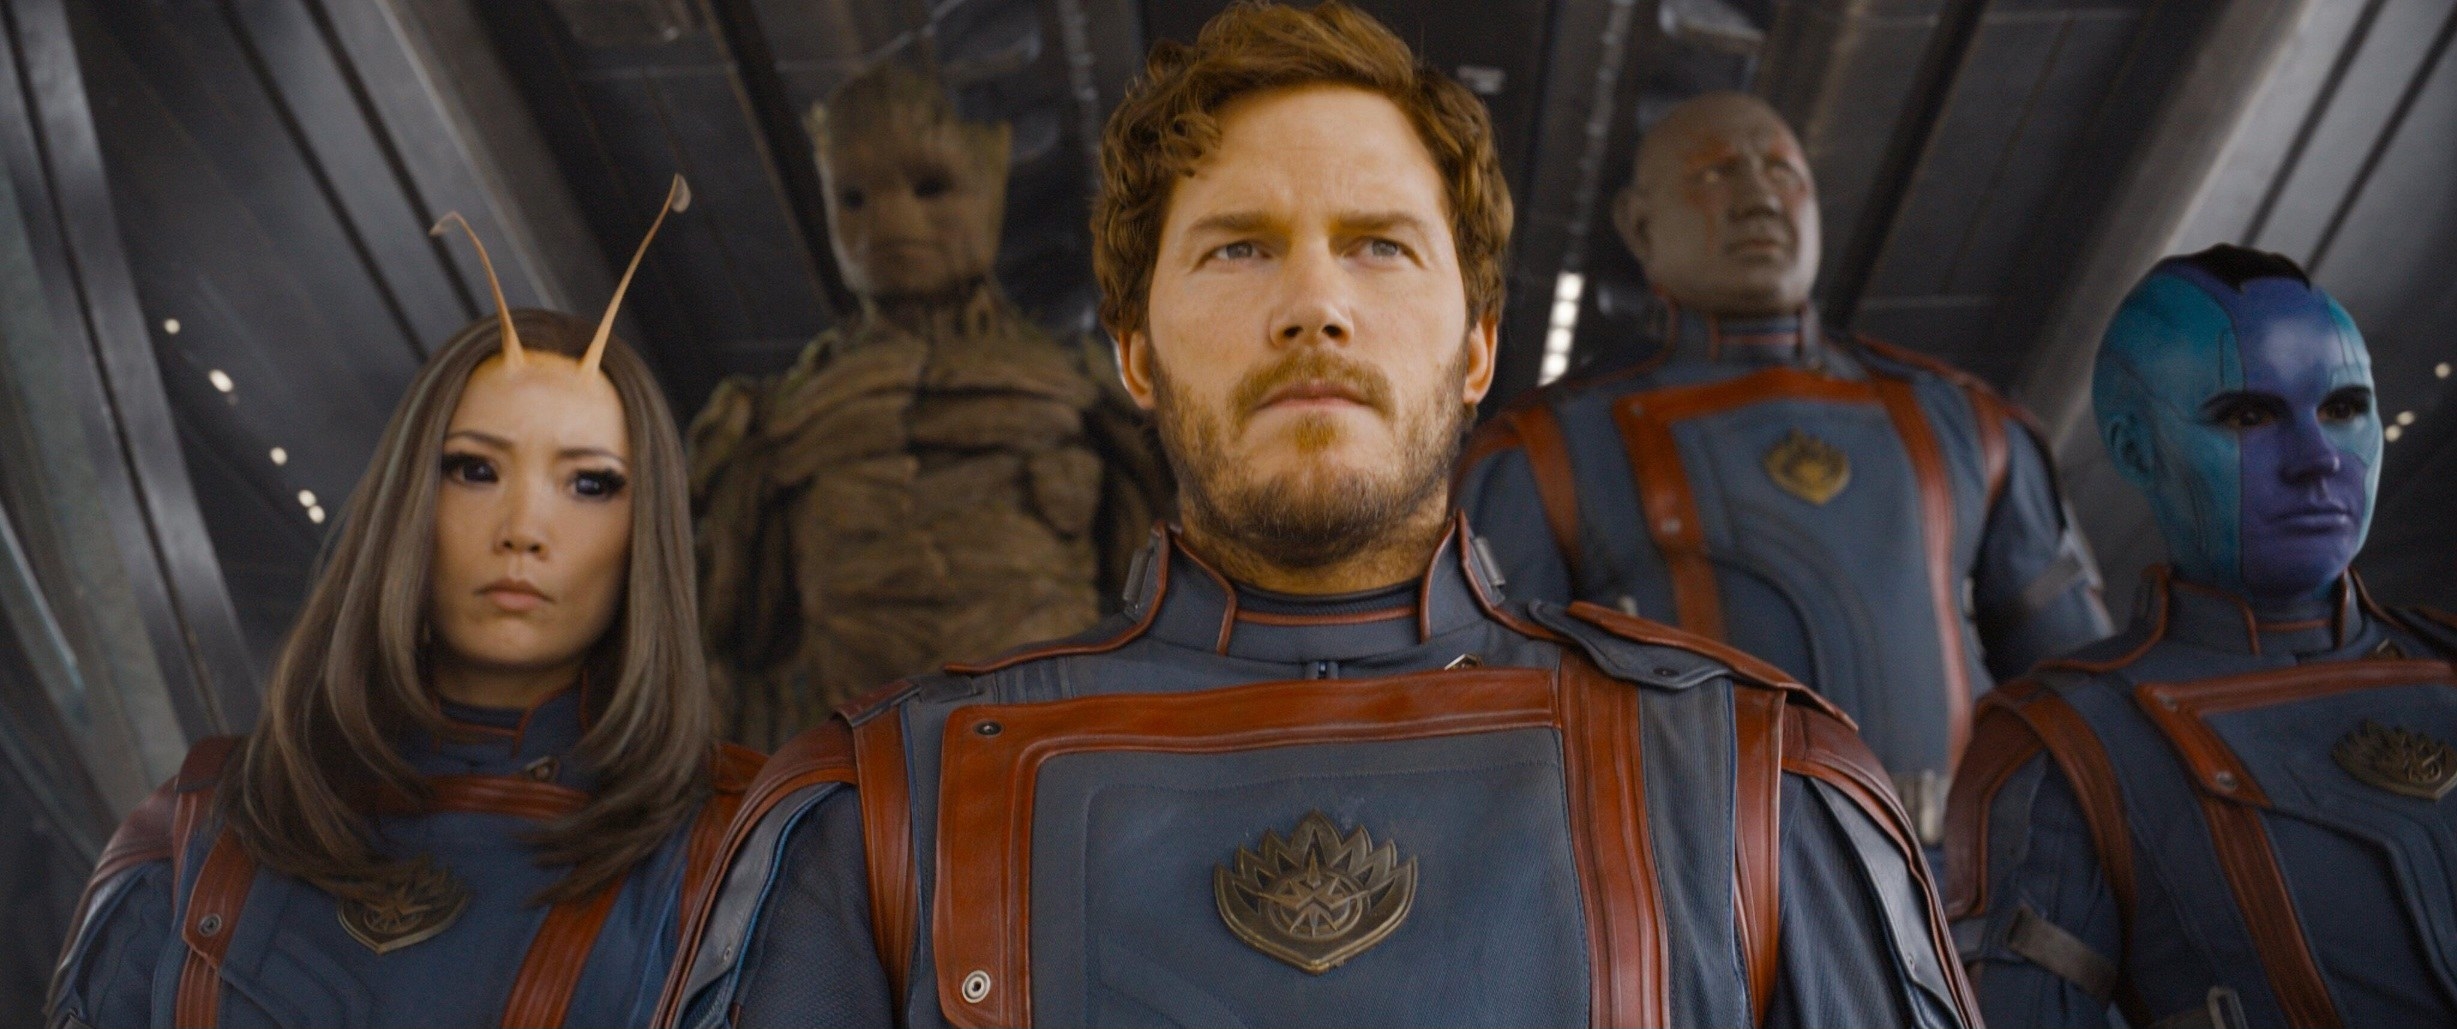 The Guardians of the Galaxy exit a spacecraft in matching outfits